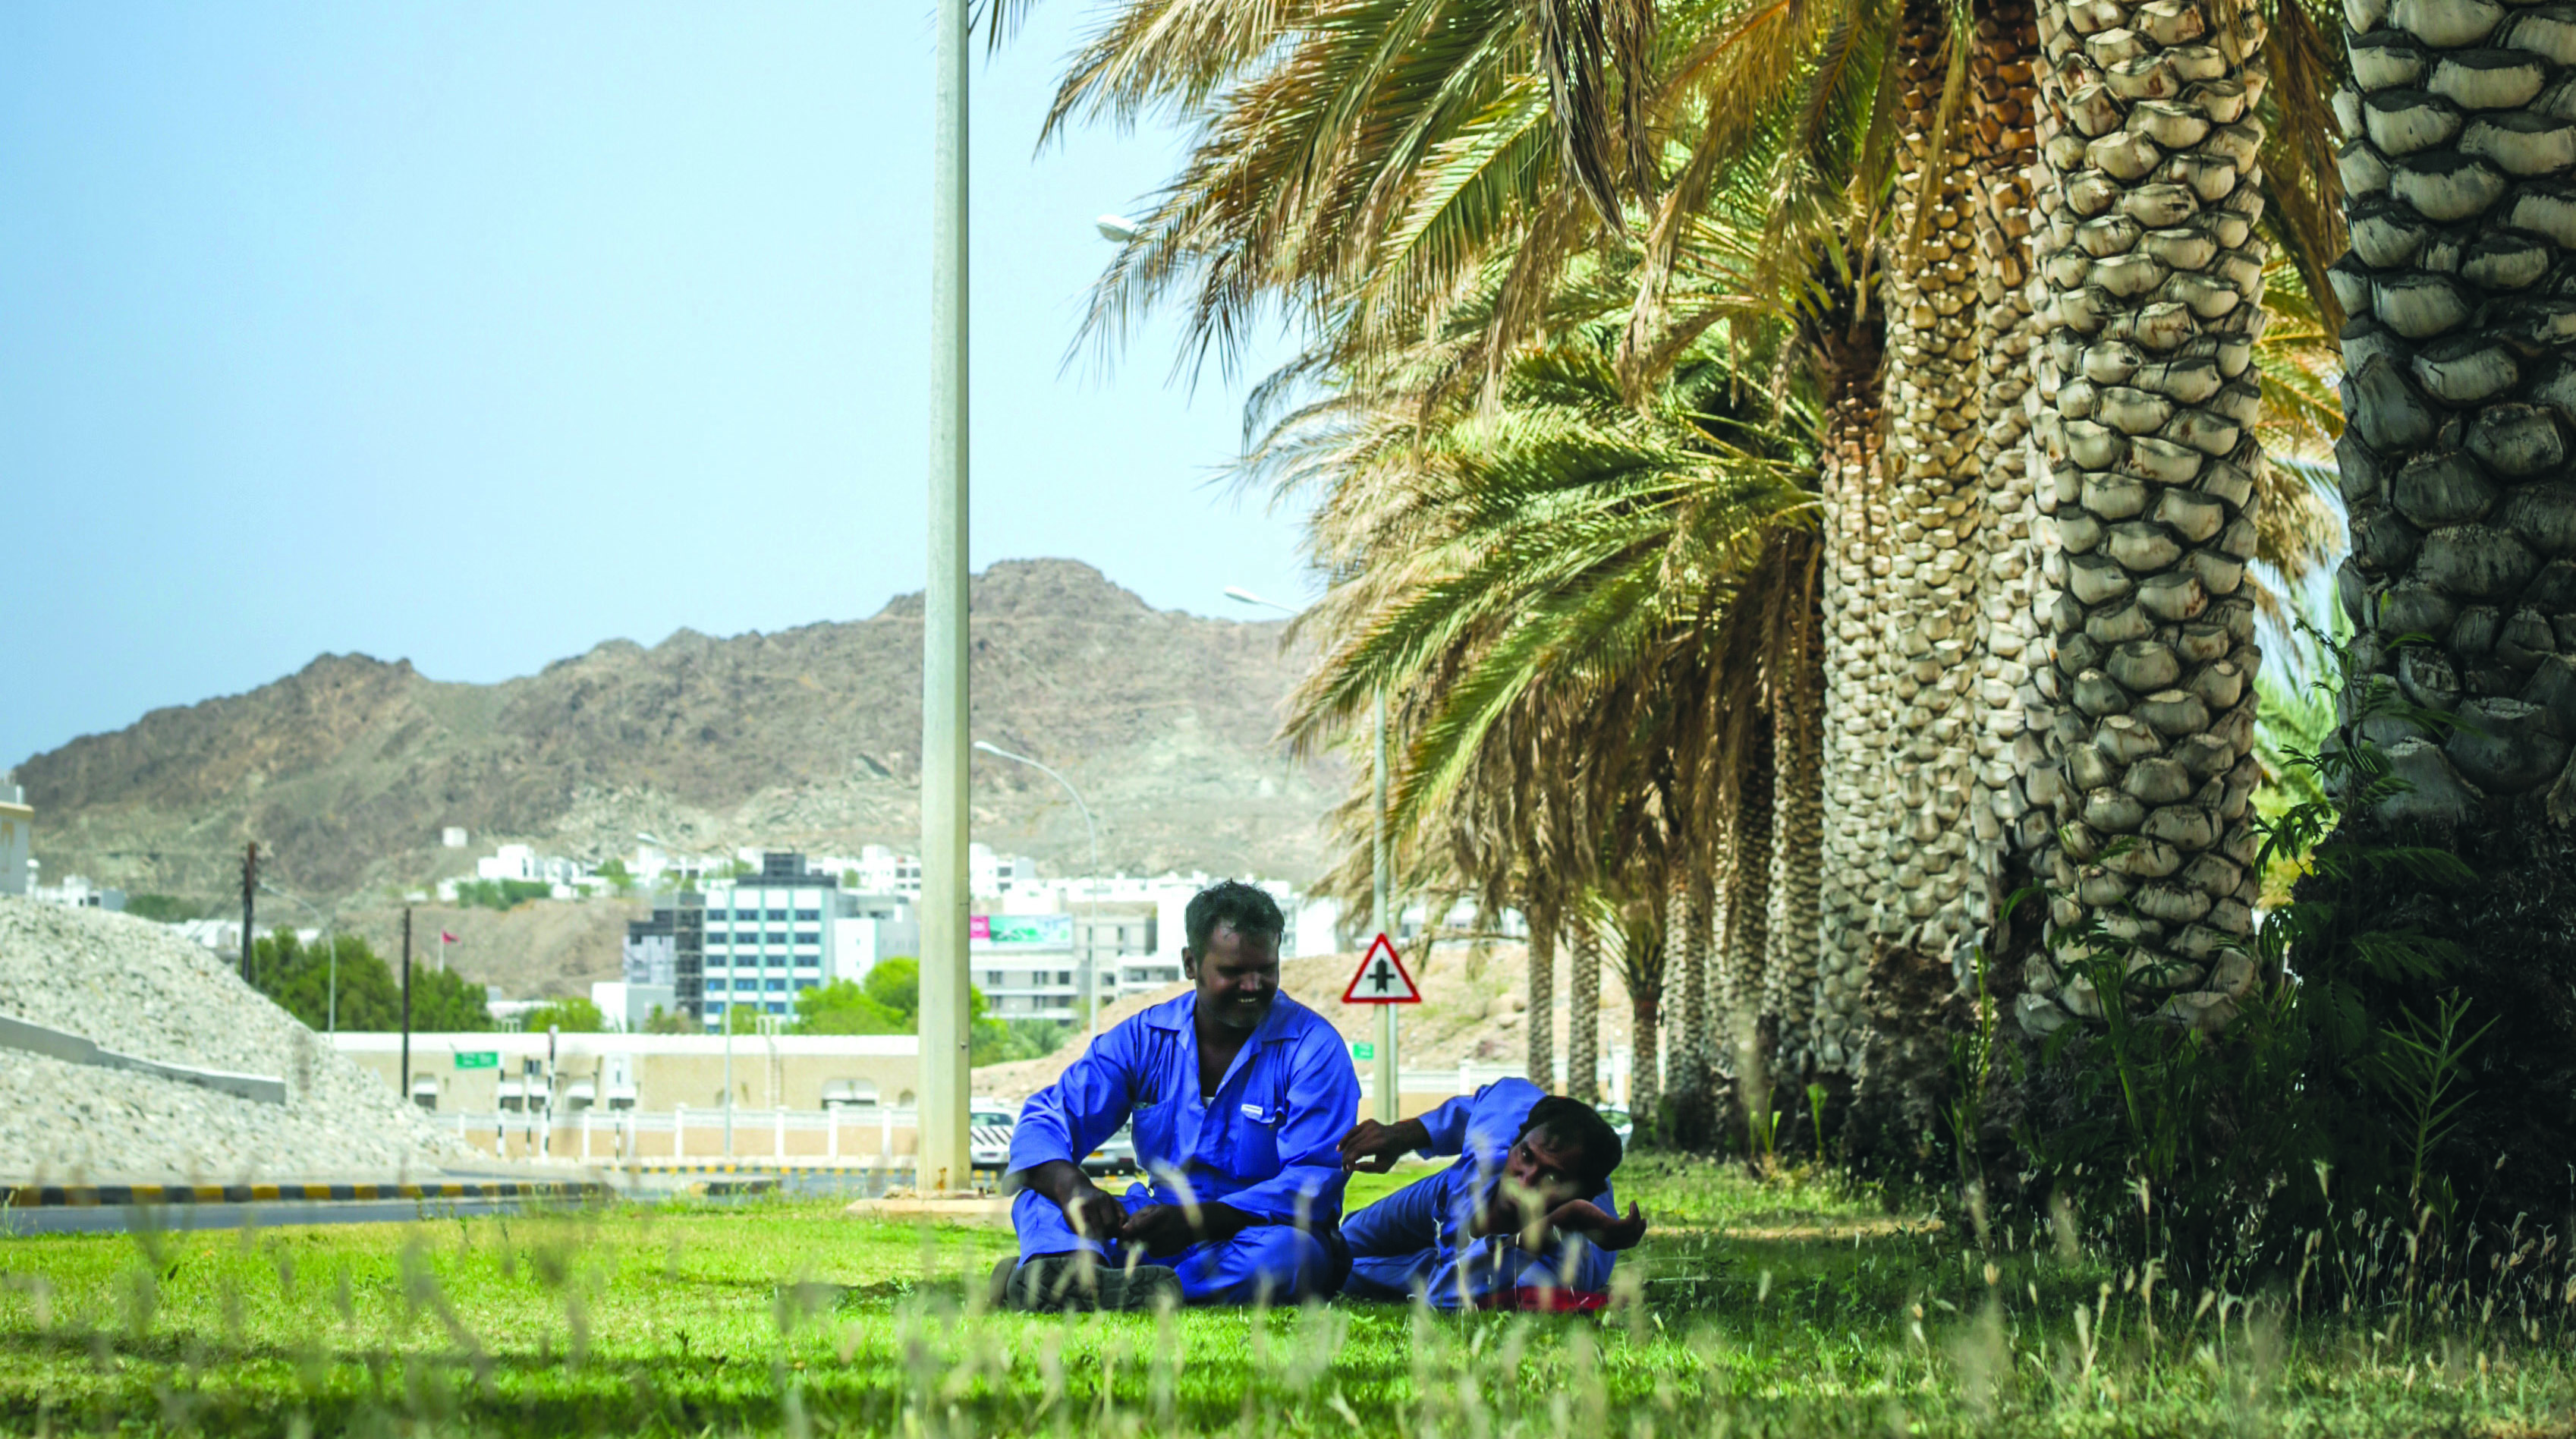 Give the workers in Oman a break in sizzling summer